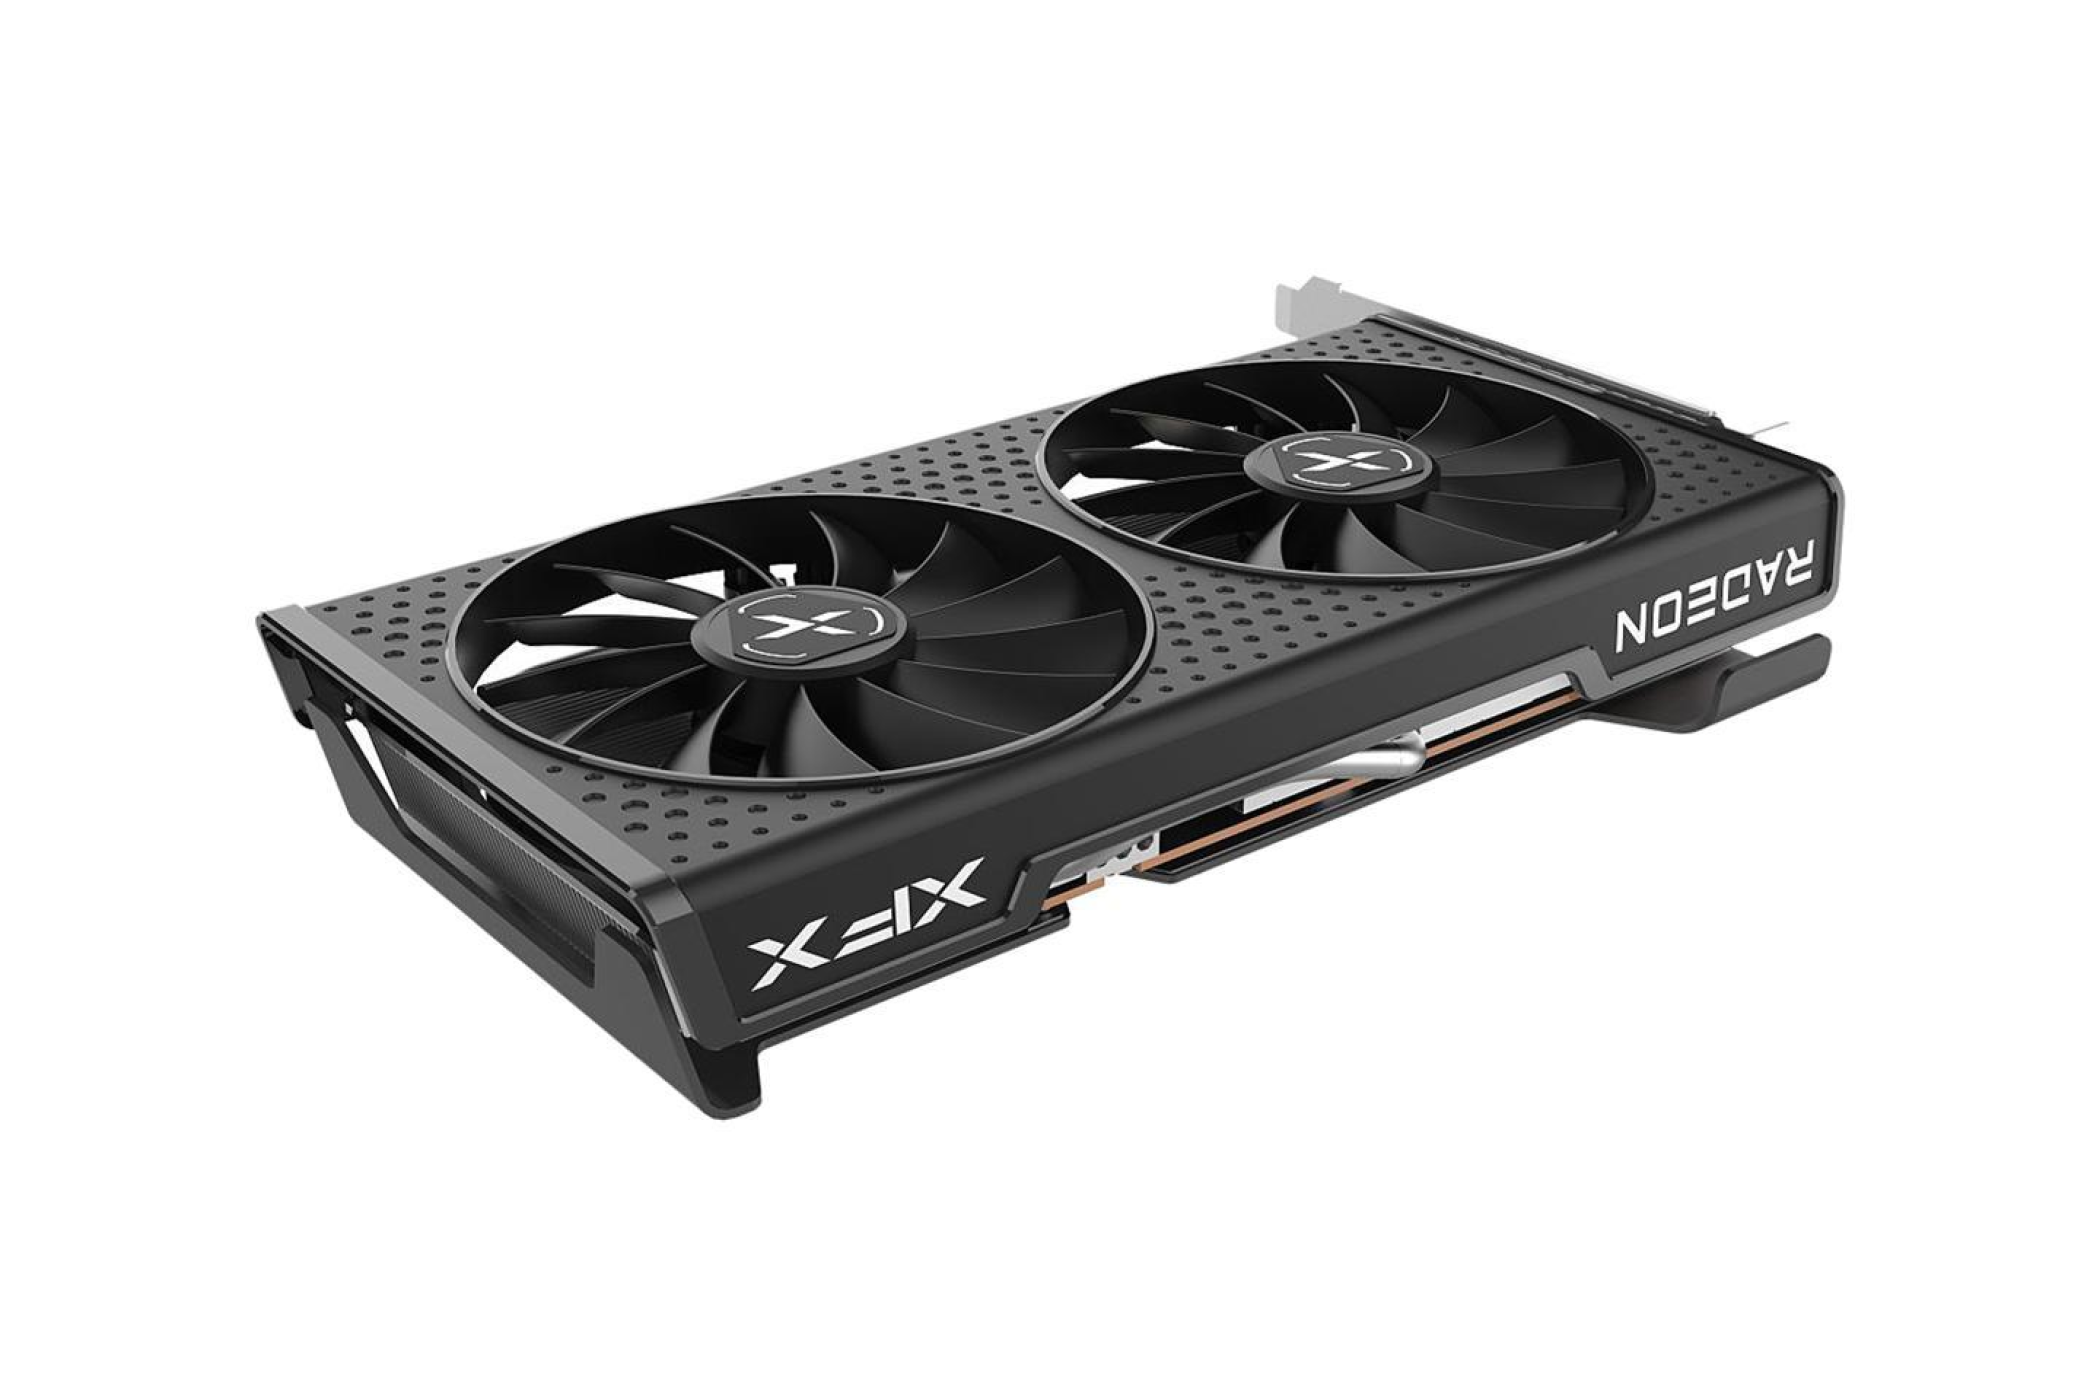 The XFX RX 6500 XT graphics card.